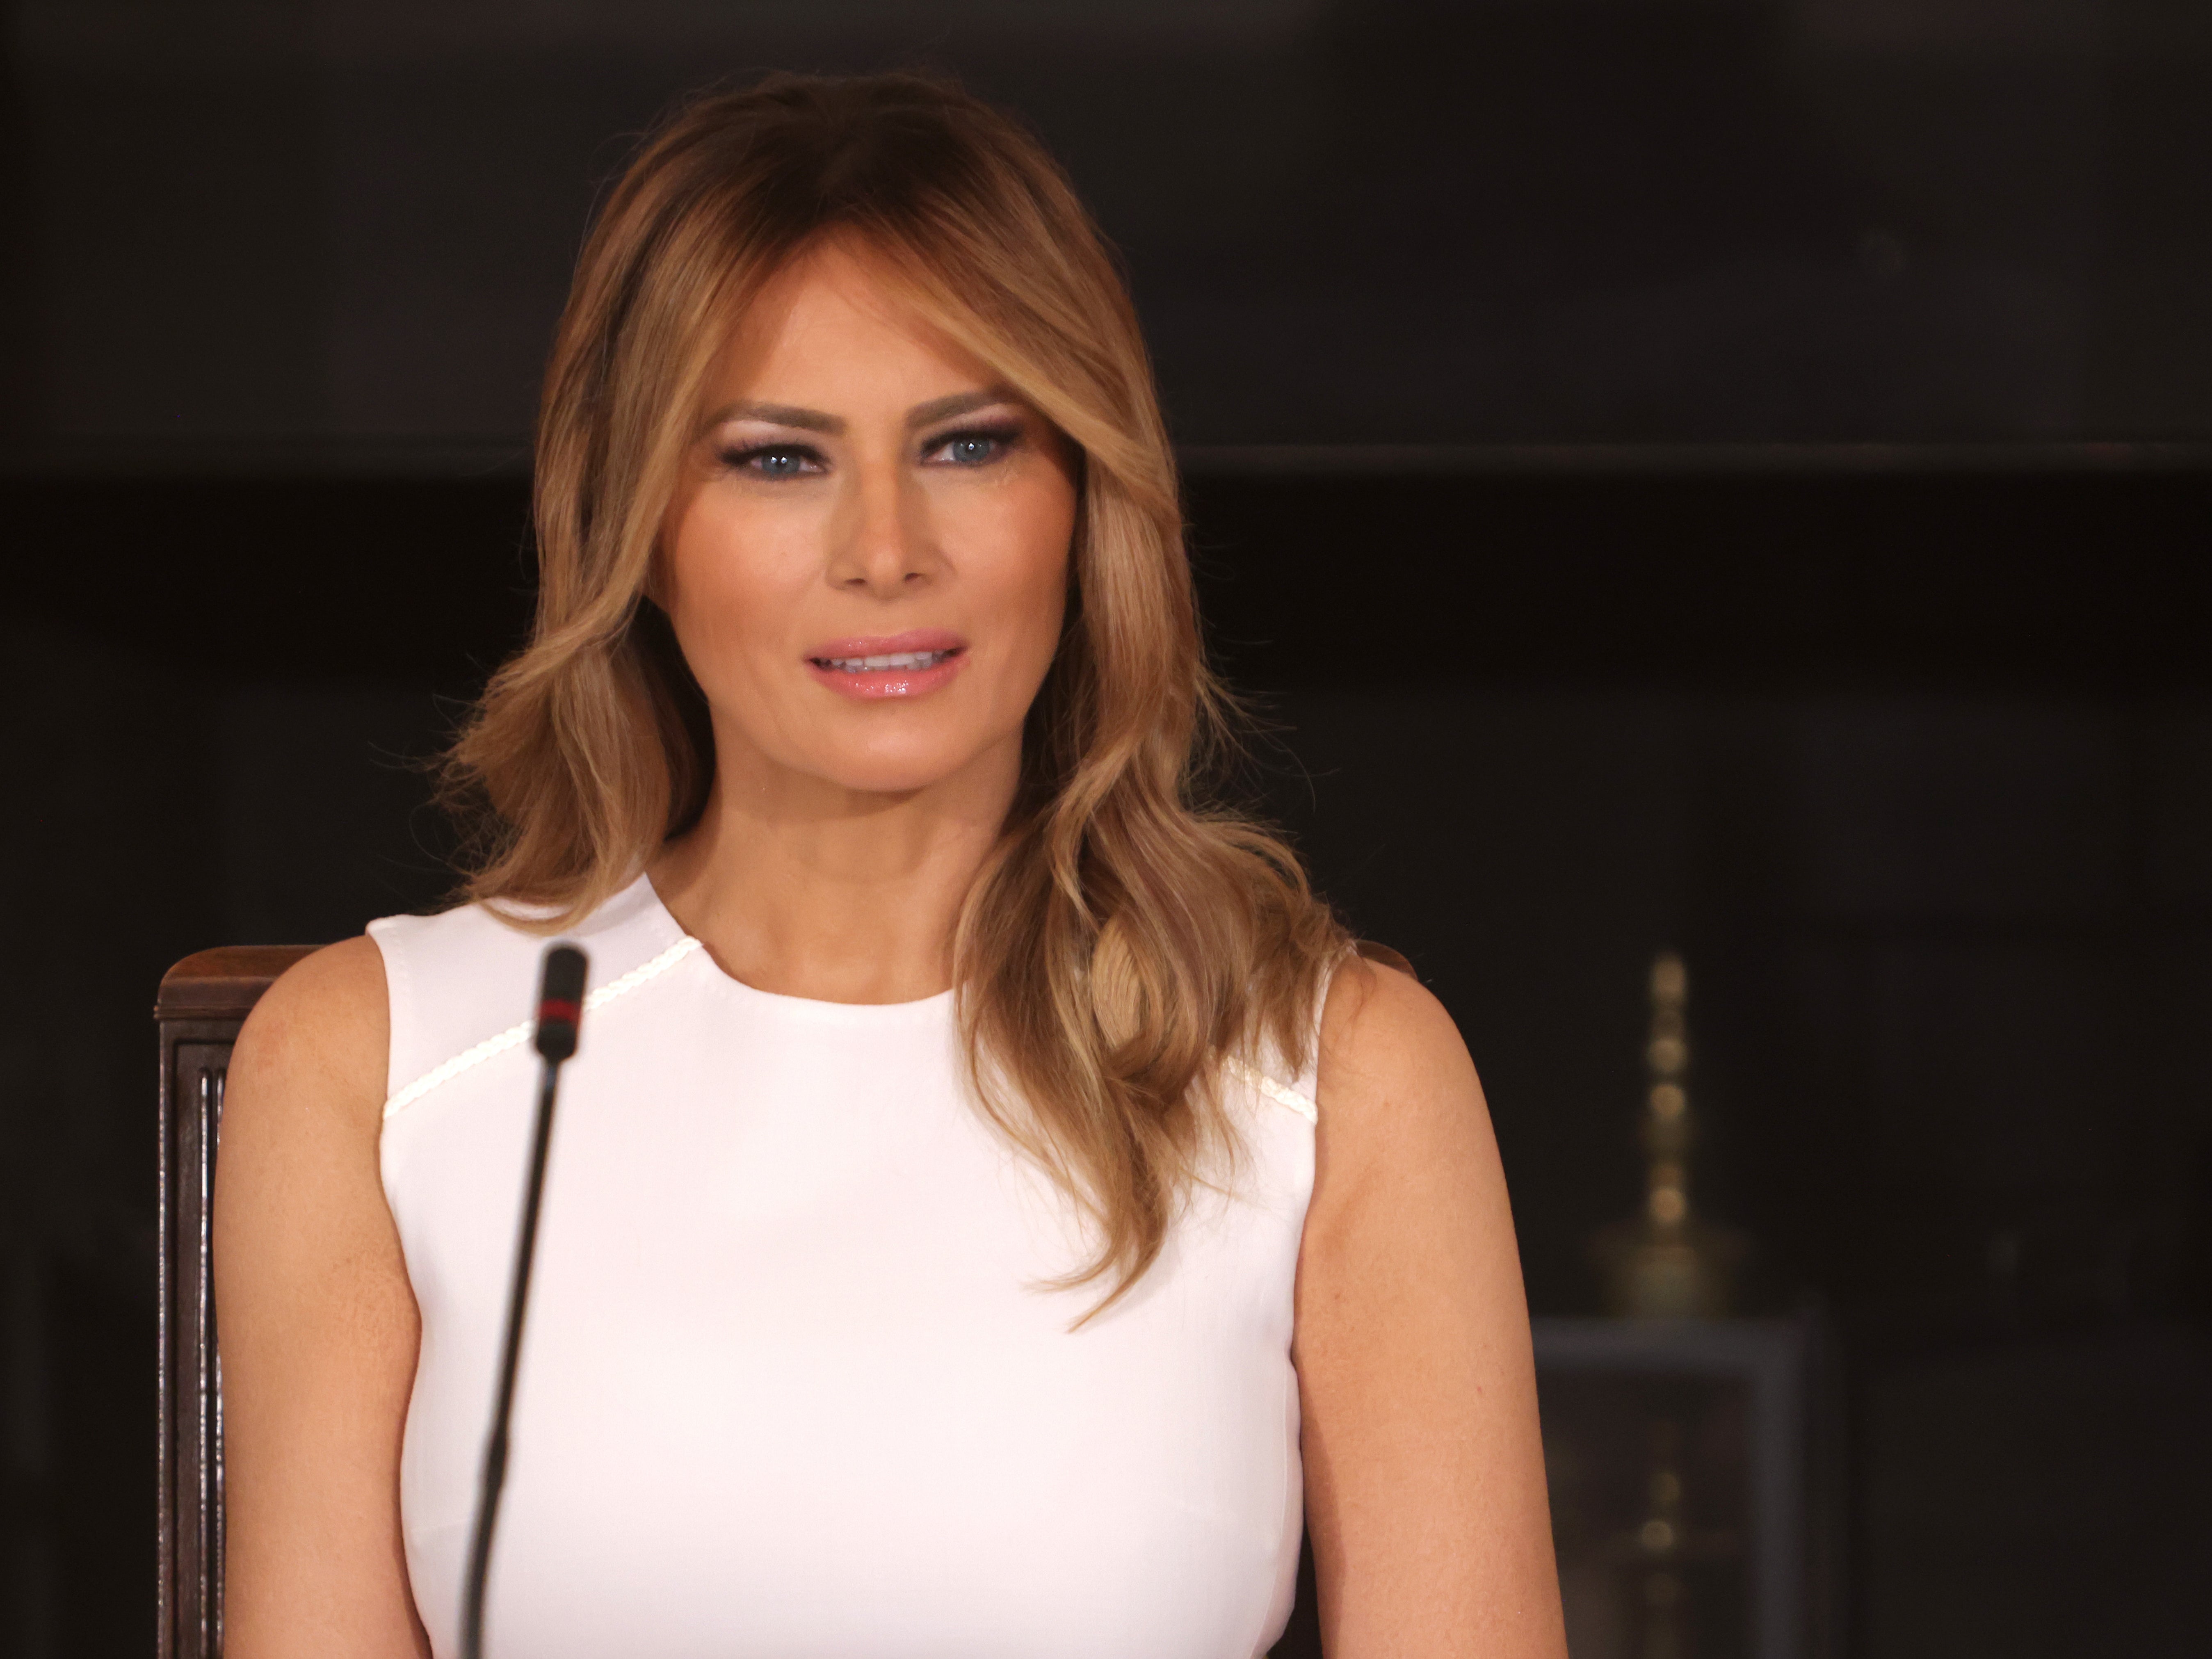 File: Parler says it has entered into a ‘special arrangement’ for Melania Trump’s social media communications